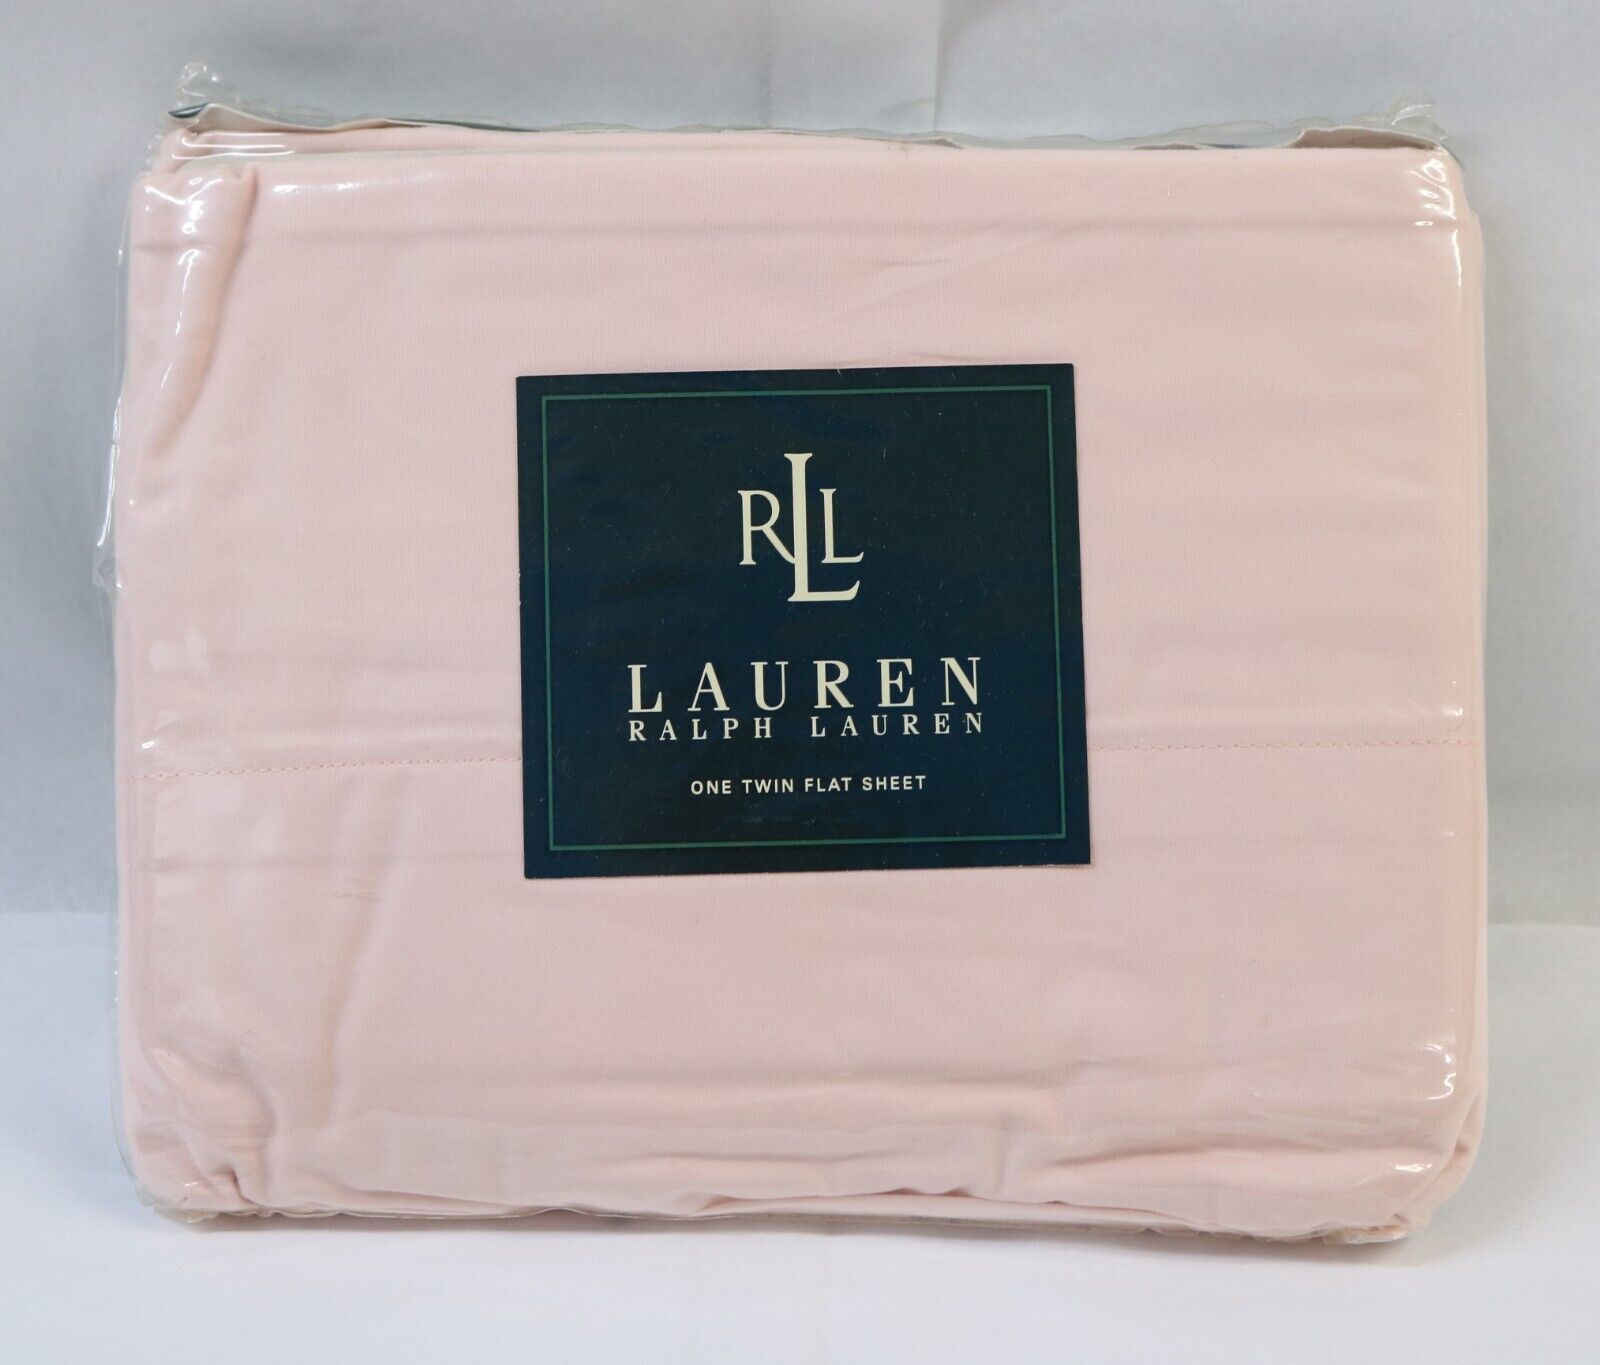 Vintage 66” X 96” Solid Pink Twin Flat Sheet By RALPH LAUREN 250 Thread Count - $39.99